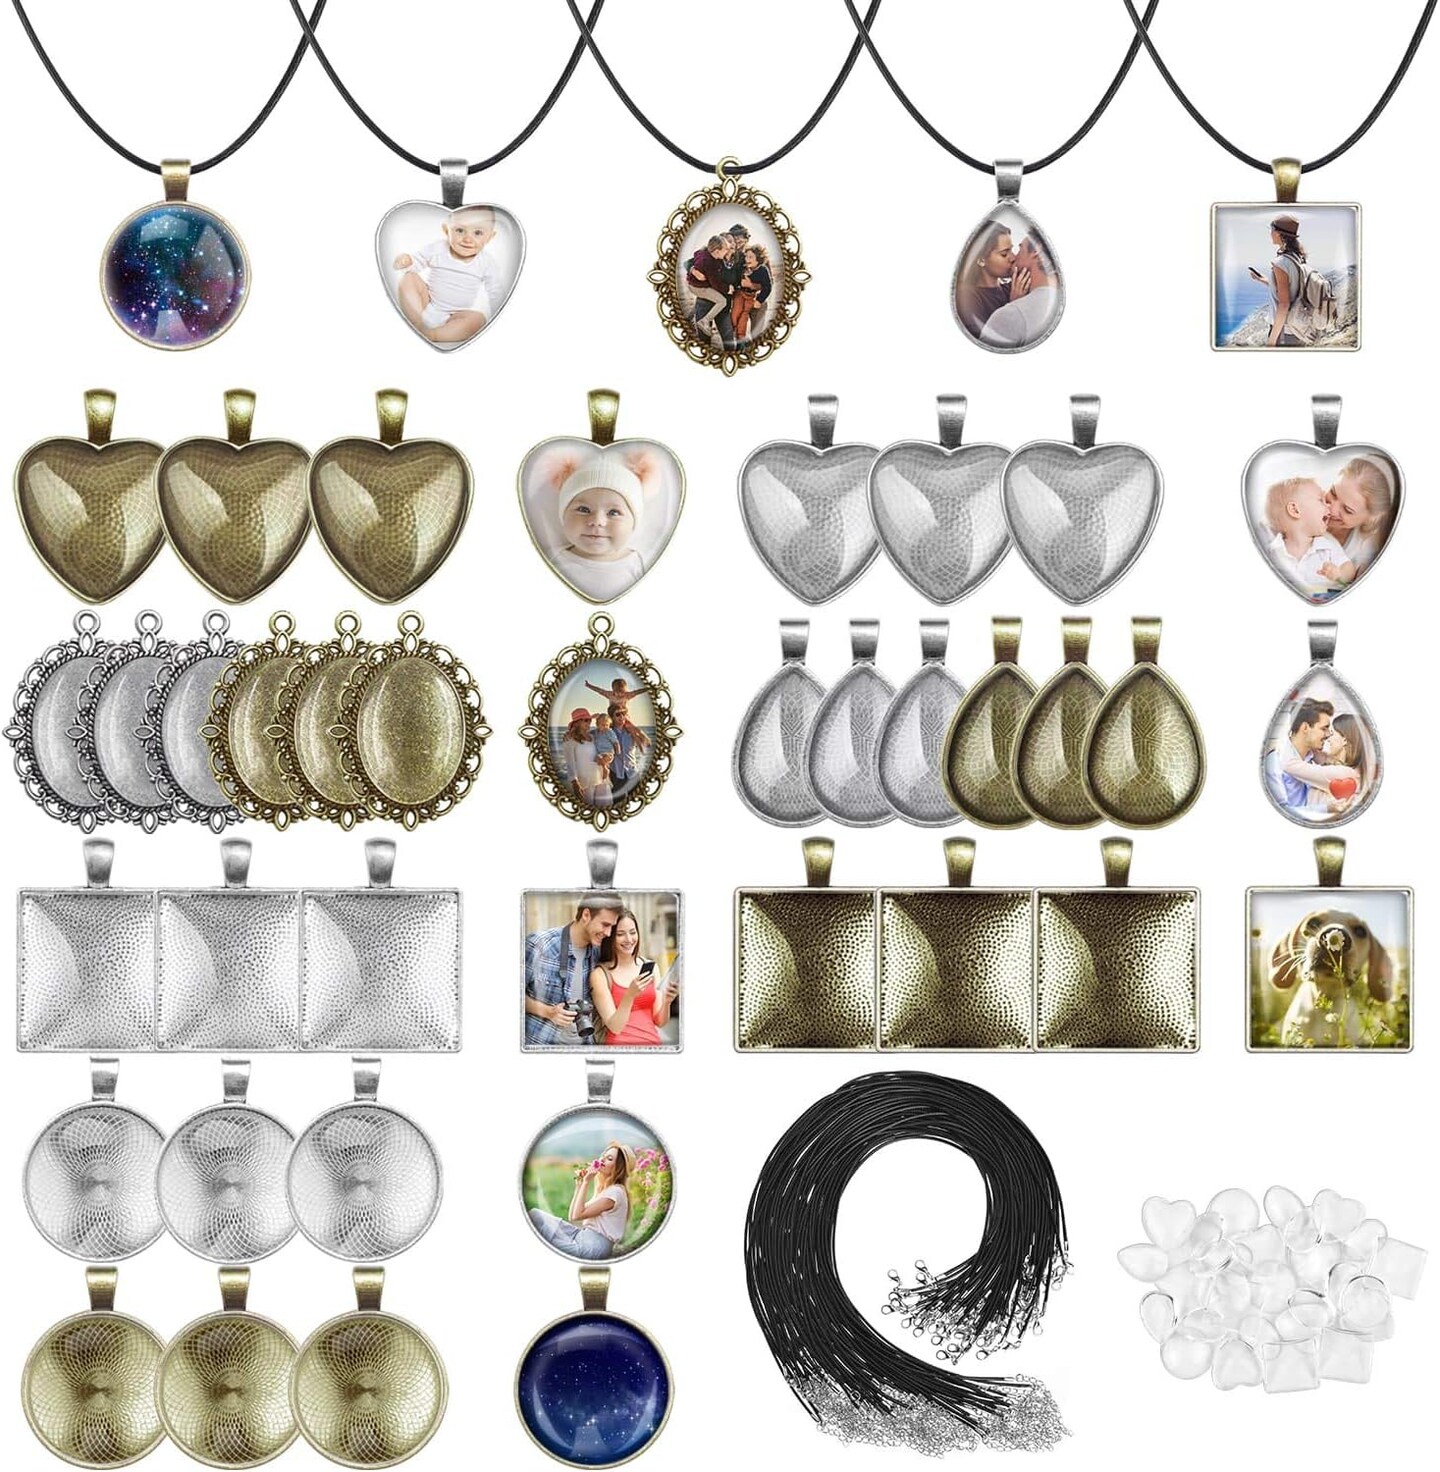 Pendant Trays with Glass Cabochons for Jewelry Making, 90pcs Pendants Trays Set Including 30pcs Bezel Pendant Trays Blanks, 30pcs Glass Cabochons and 30pcs Necklaces Cords for Necklace Making